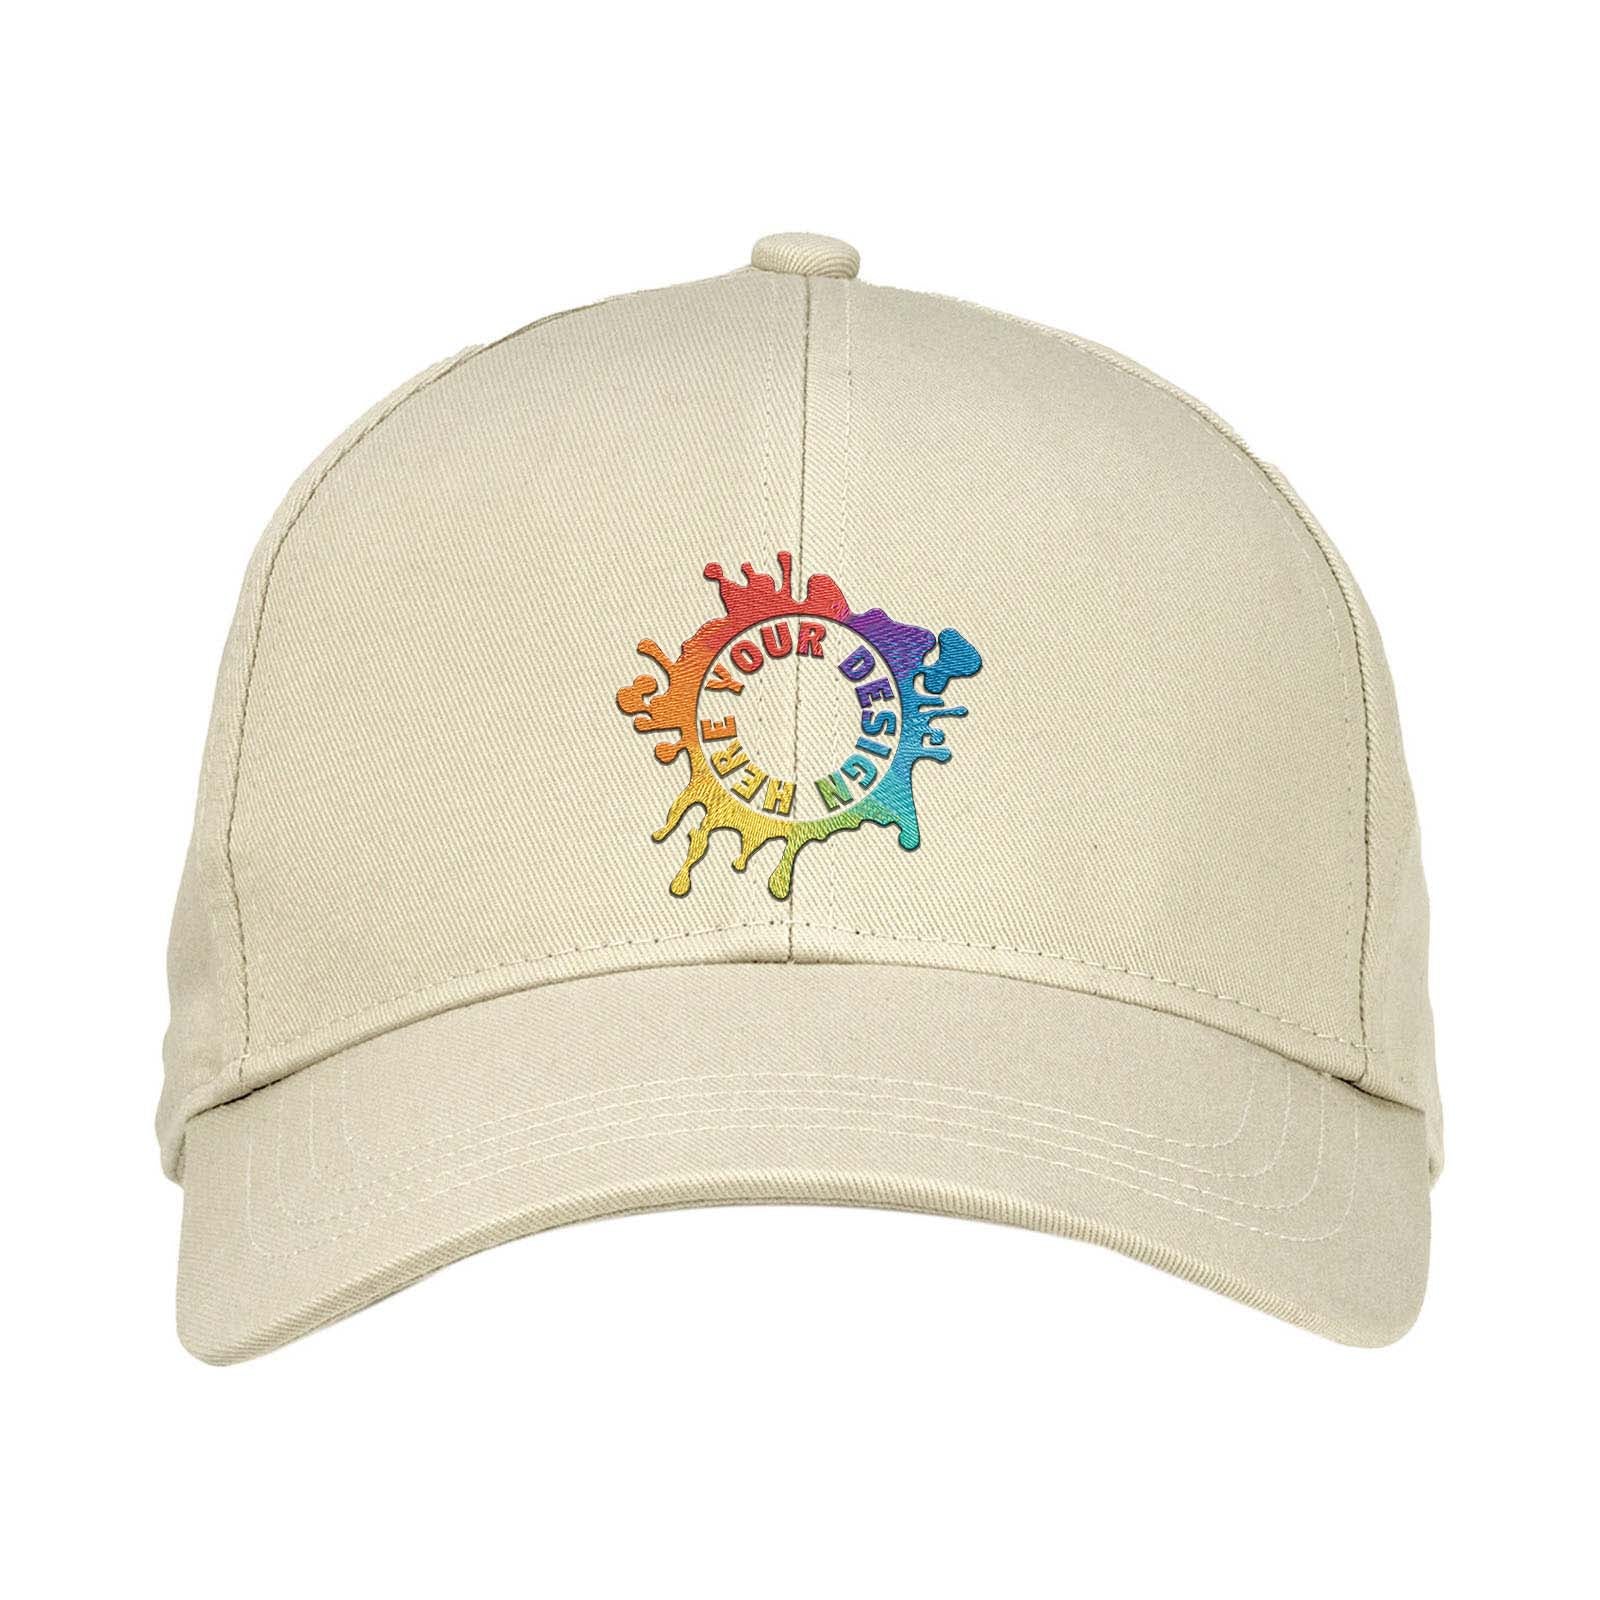 Embroidered econscious Structured Eco Baseball Cap - Mato & Hash